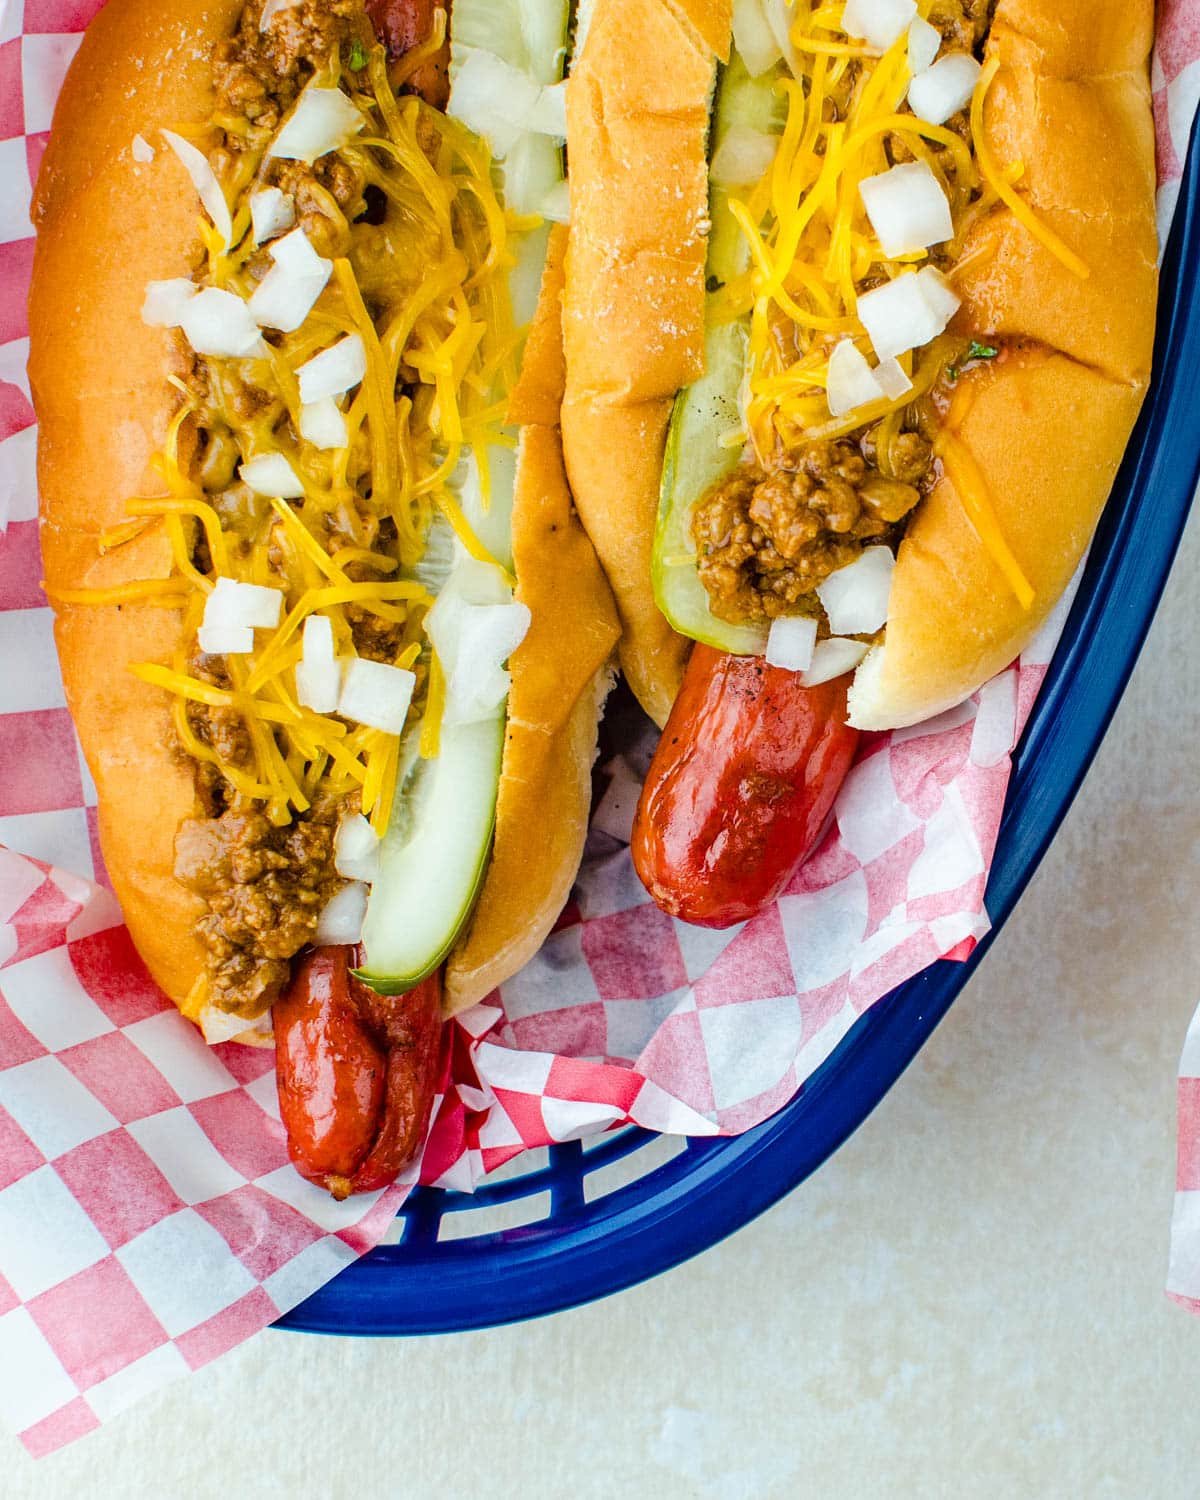 Chili cheese dogs in a basket with all the toppings.